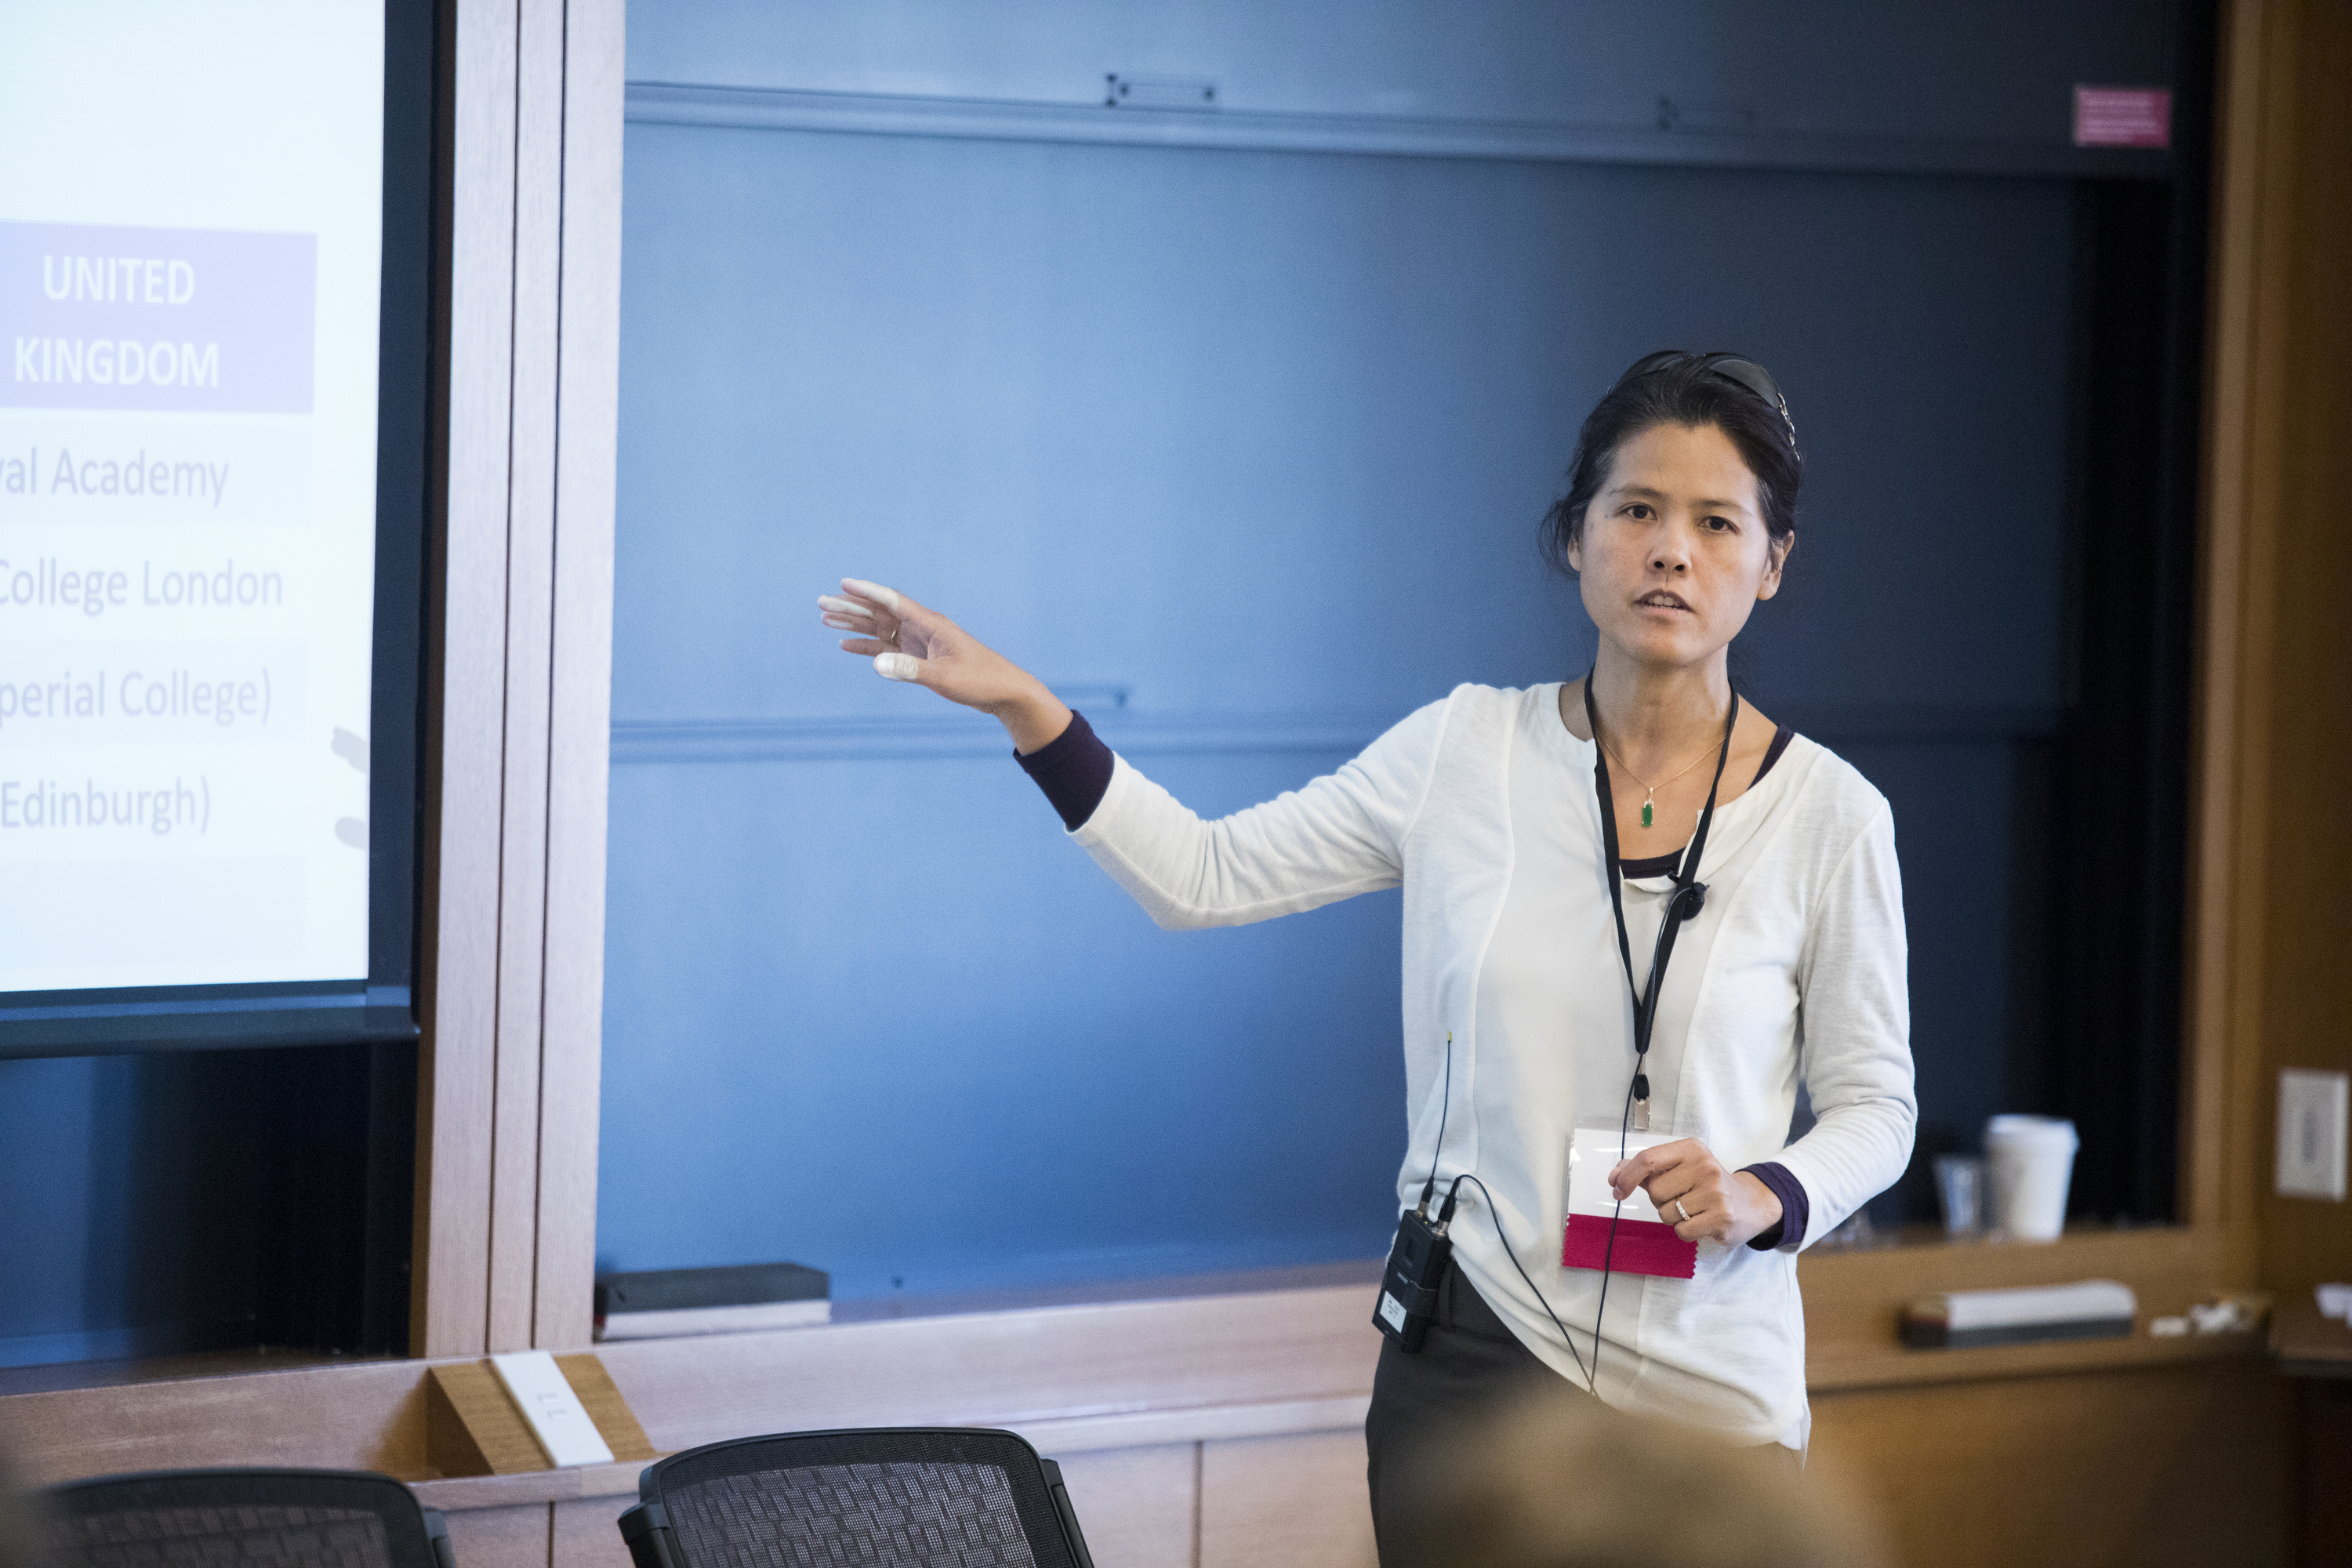 Julia C. Lee presents at "Advancing and Promoting Quality Teaching" breakout session